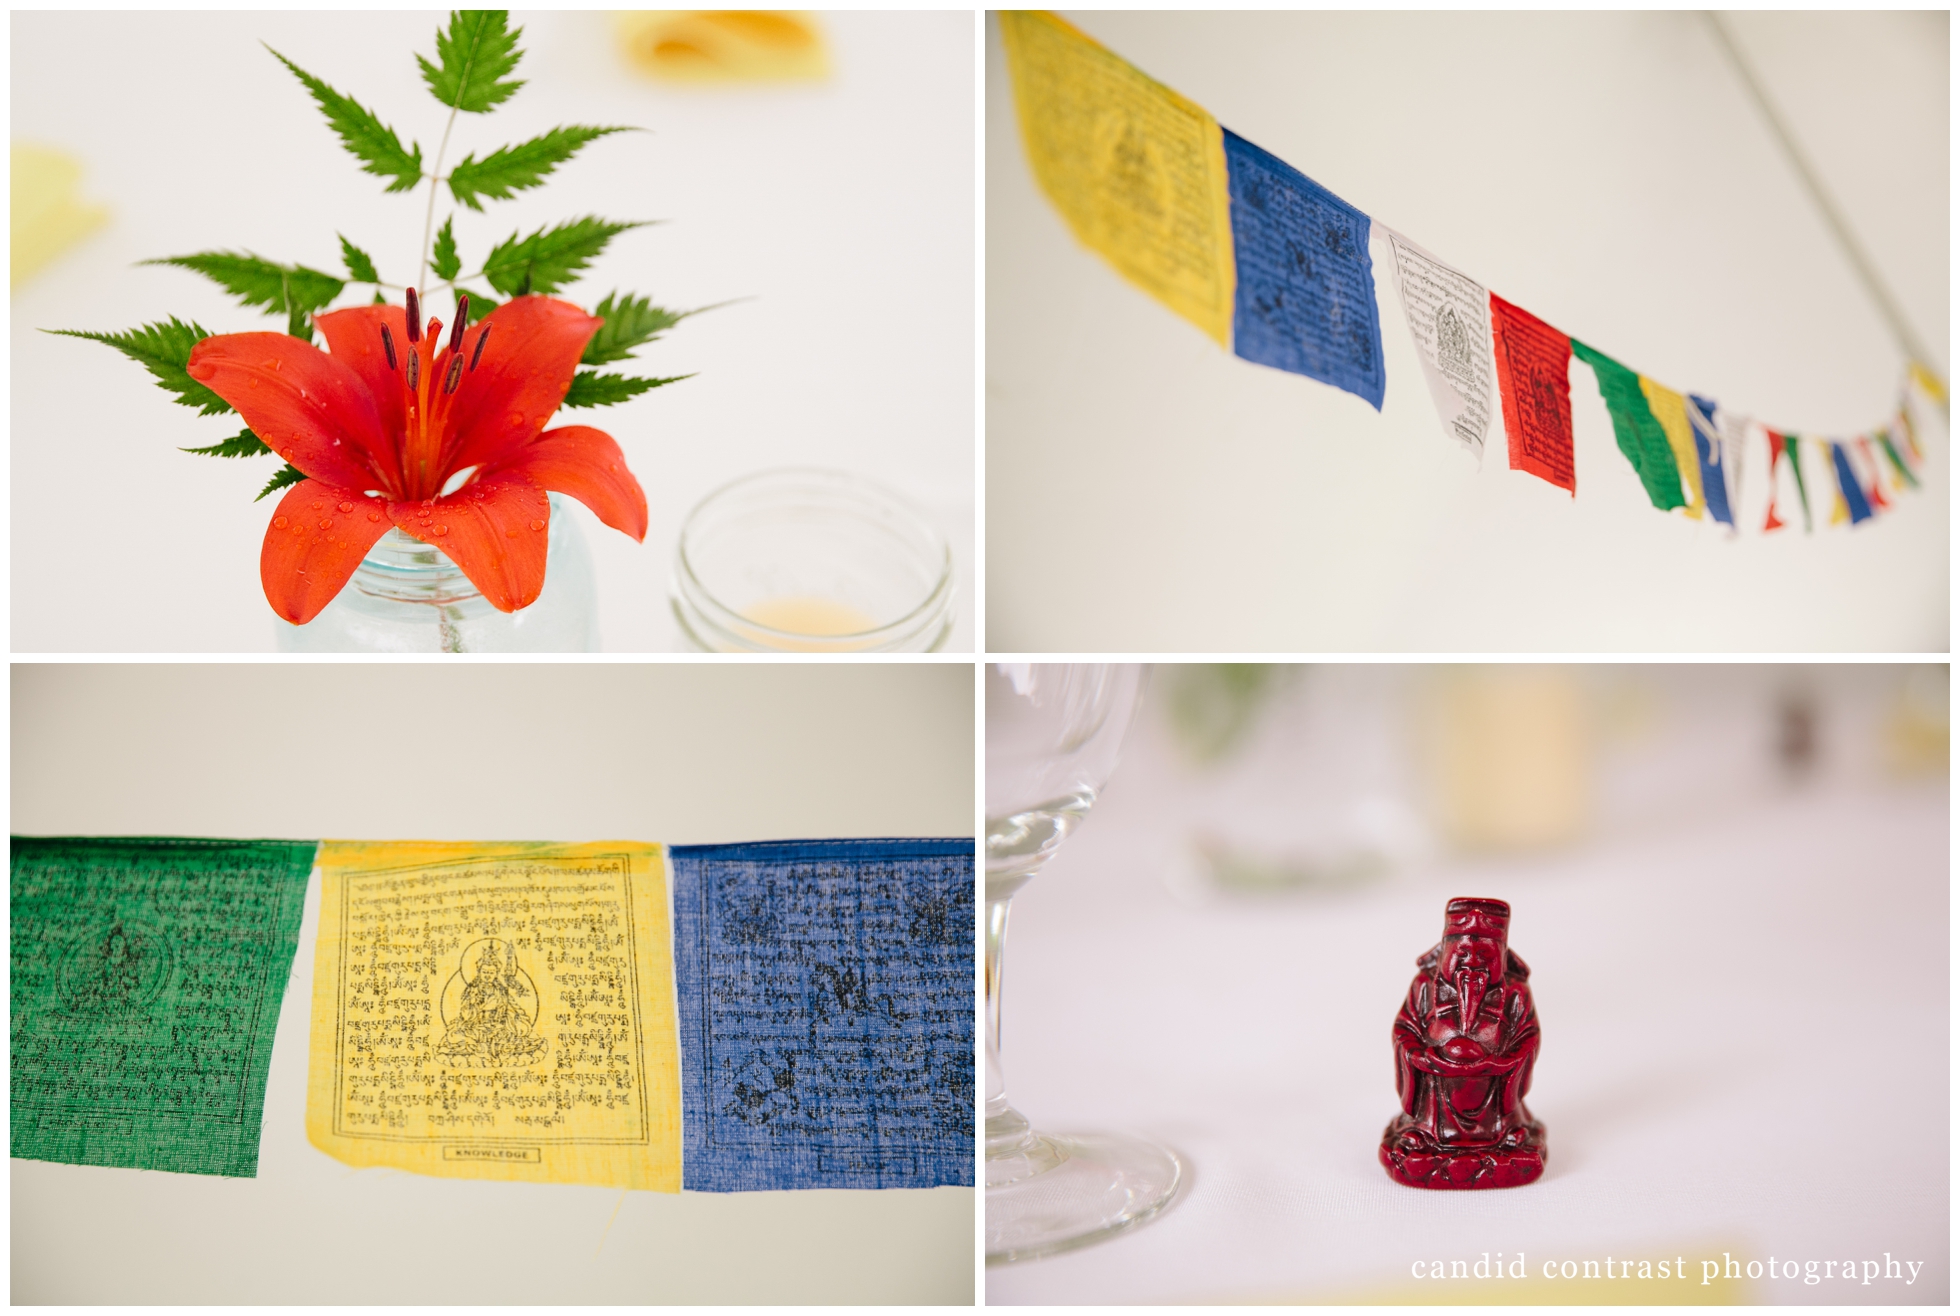 tent reception details at backyard wedding in dubuque, ia, budda & prayer flags, candid contrast photography